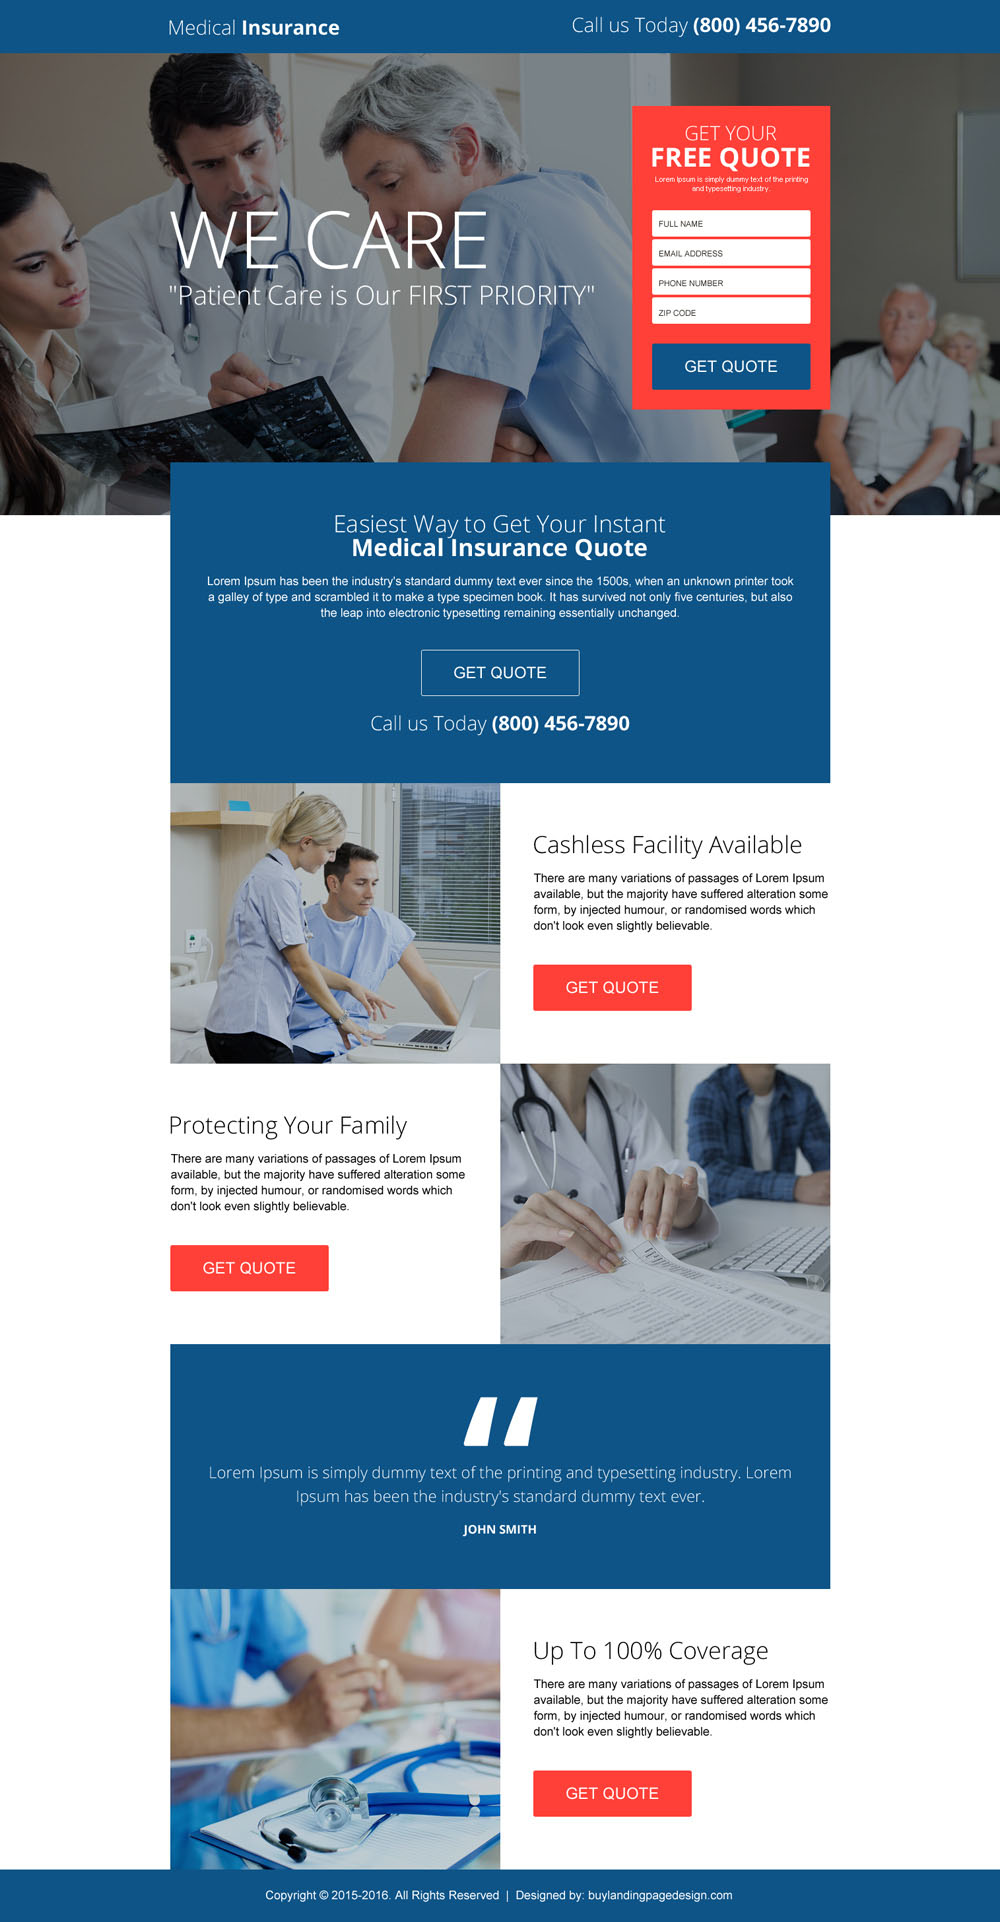 easy-medical-insurance-quote-lead-gen-landing-page-design-that-converts-006